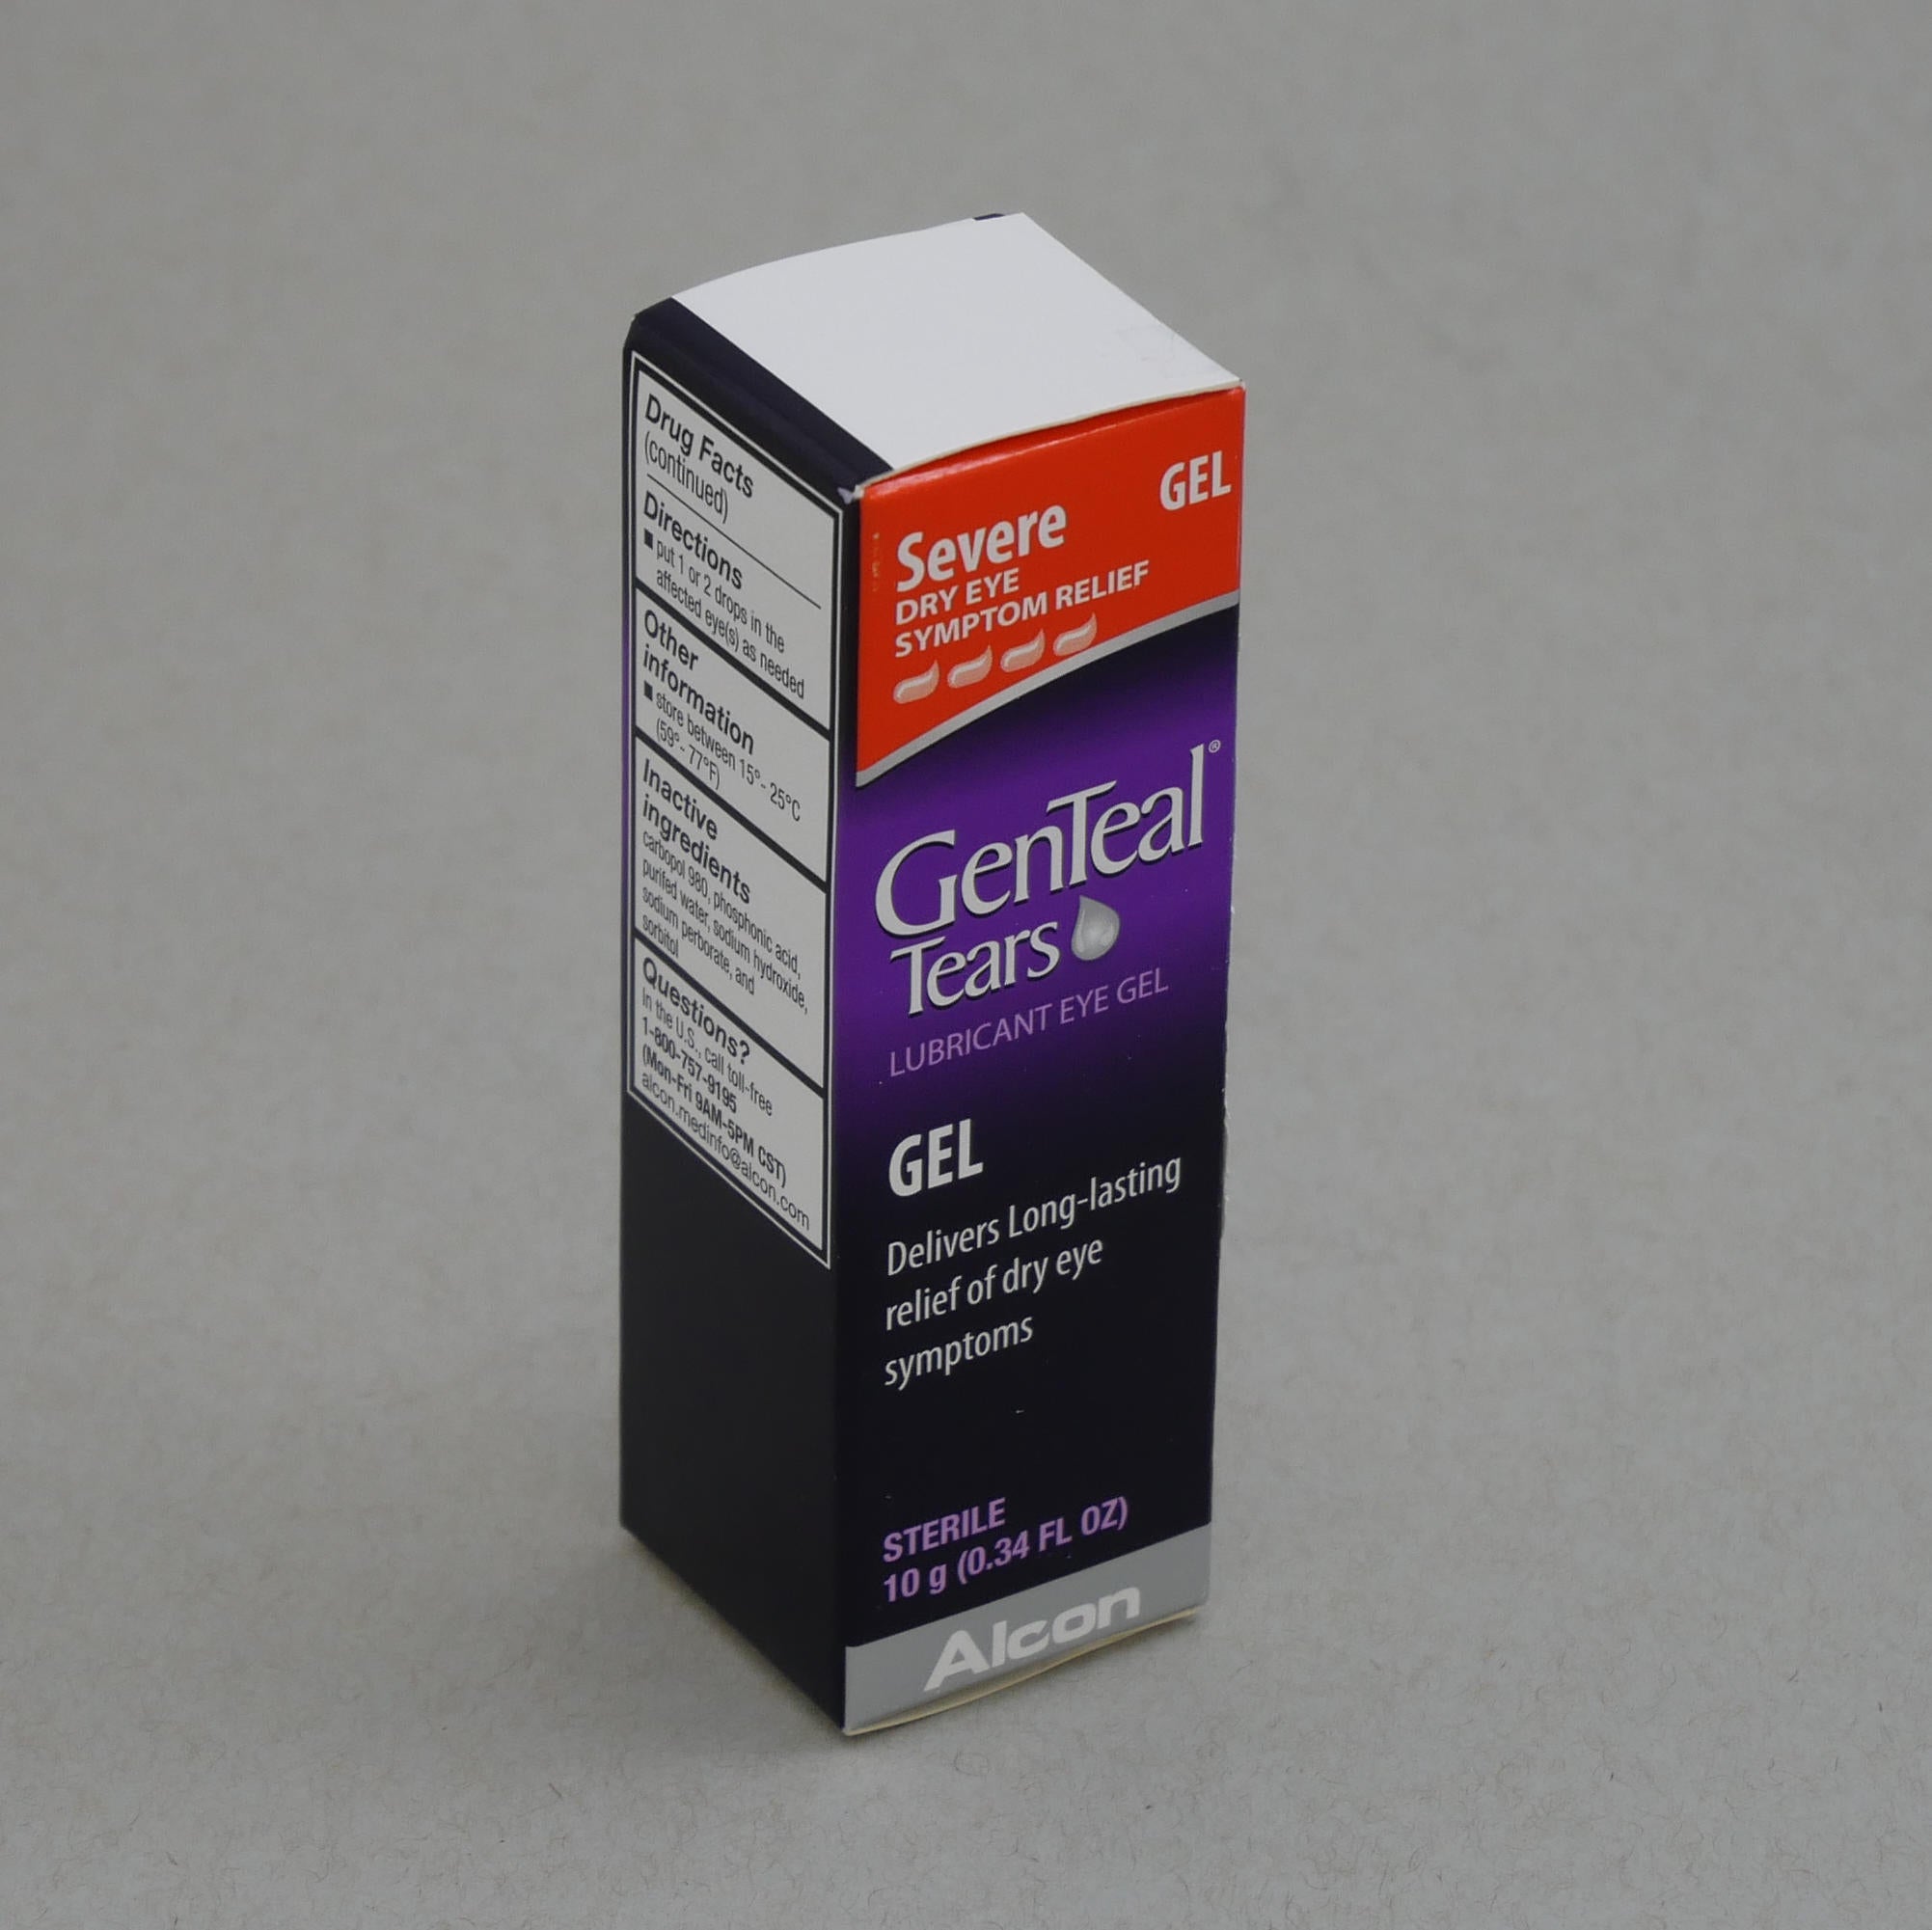 GenTeal Tears (0.3% Hypromellose) 10 ml - Goniovisc substitute